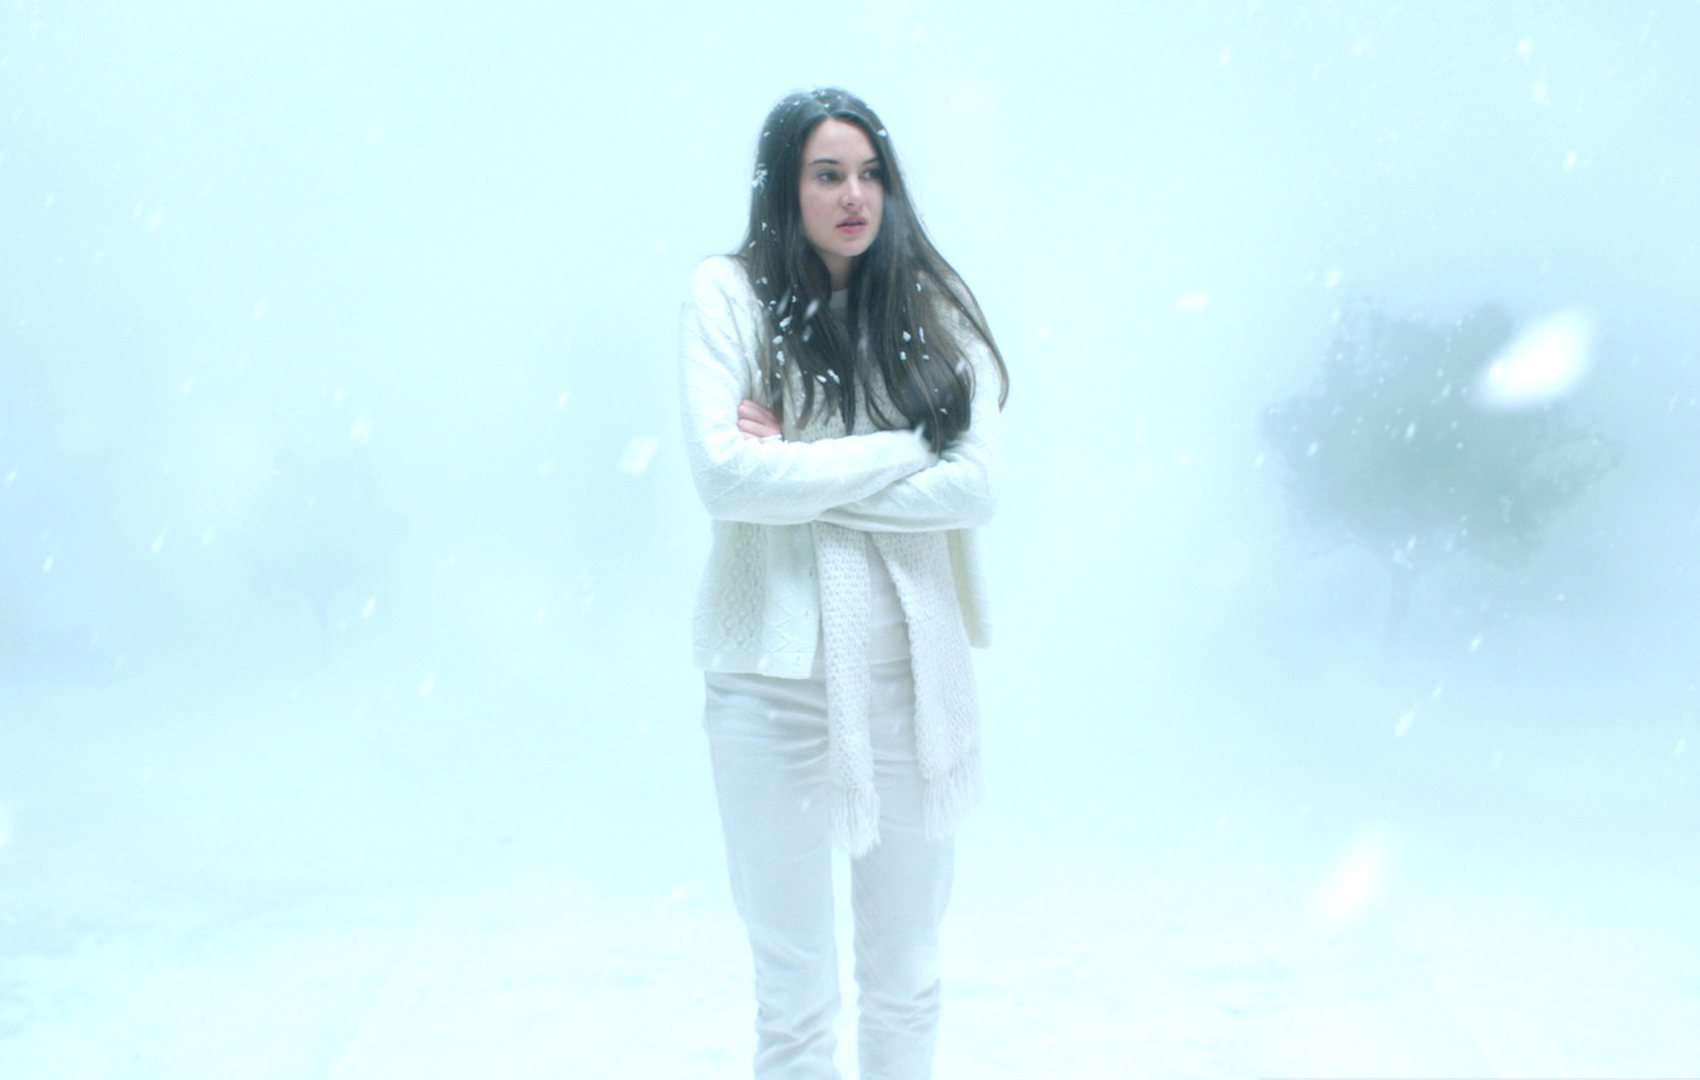 charles keith add white bird in a blizzard nudity photo